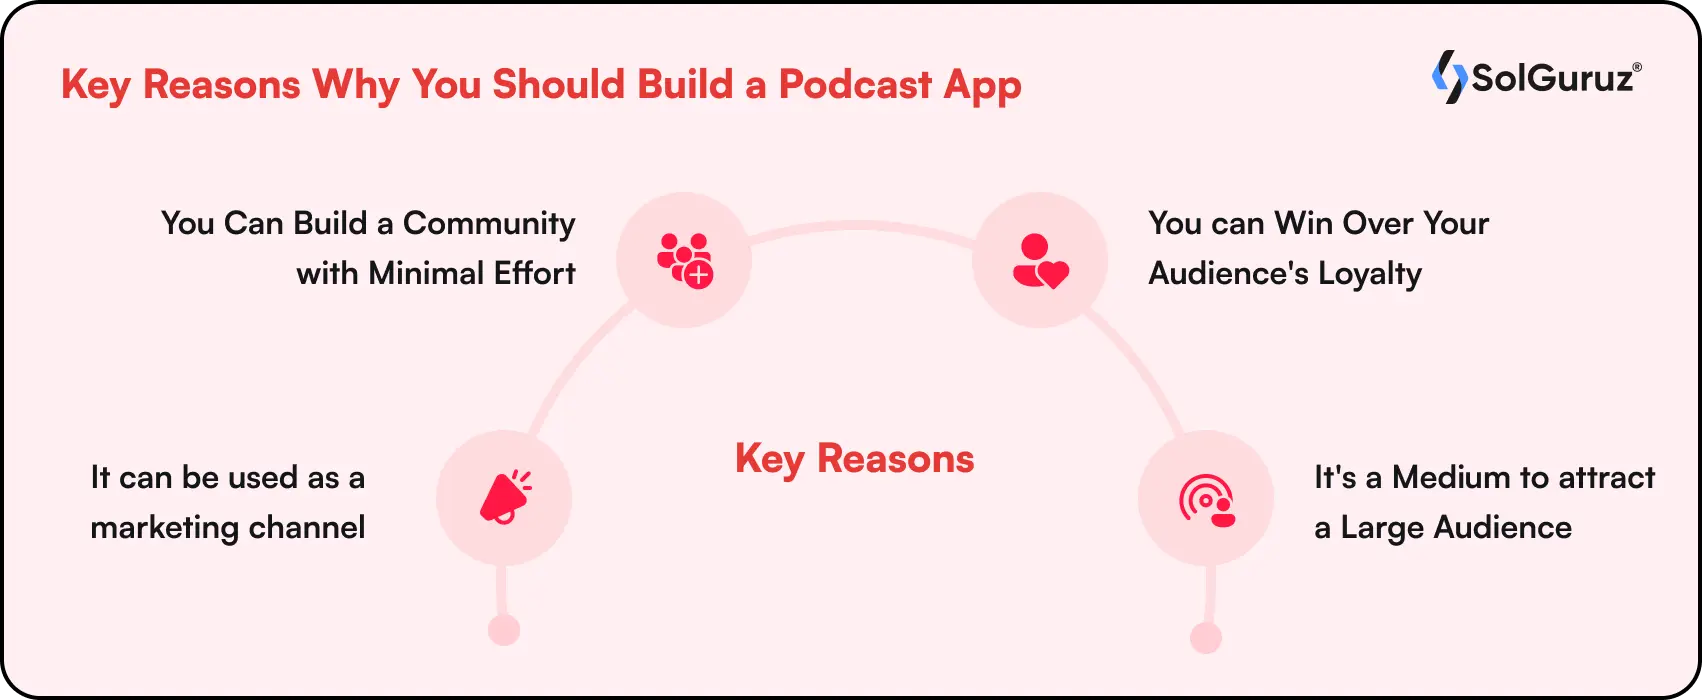 Key Reasons Why You Should Build a Podcast App